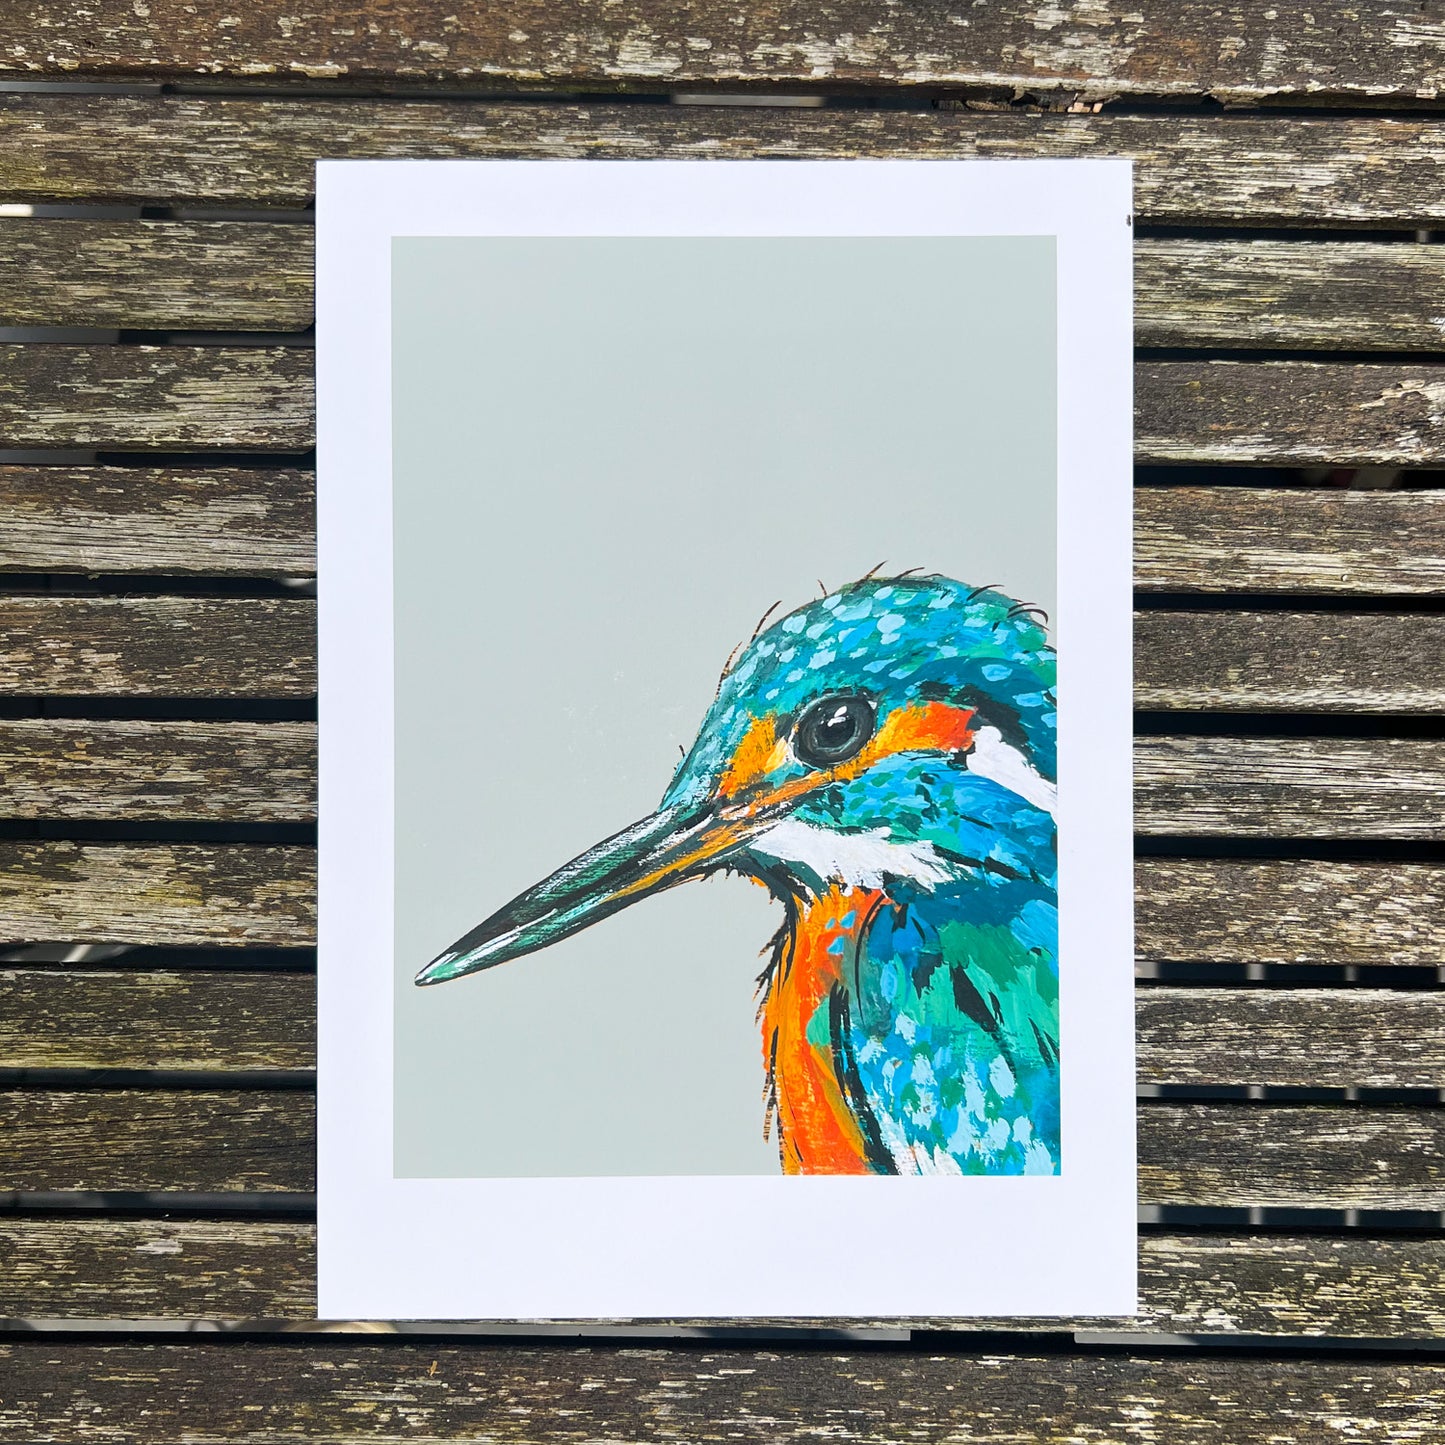 Print illustration of a kingfisher photographed from above on a wooden table.